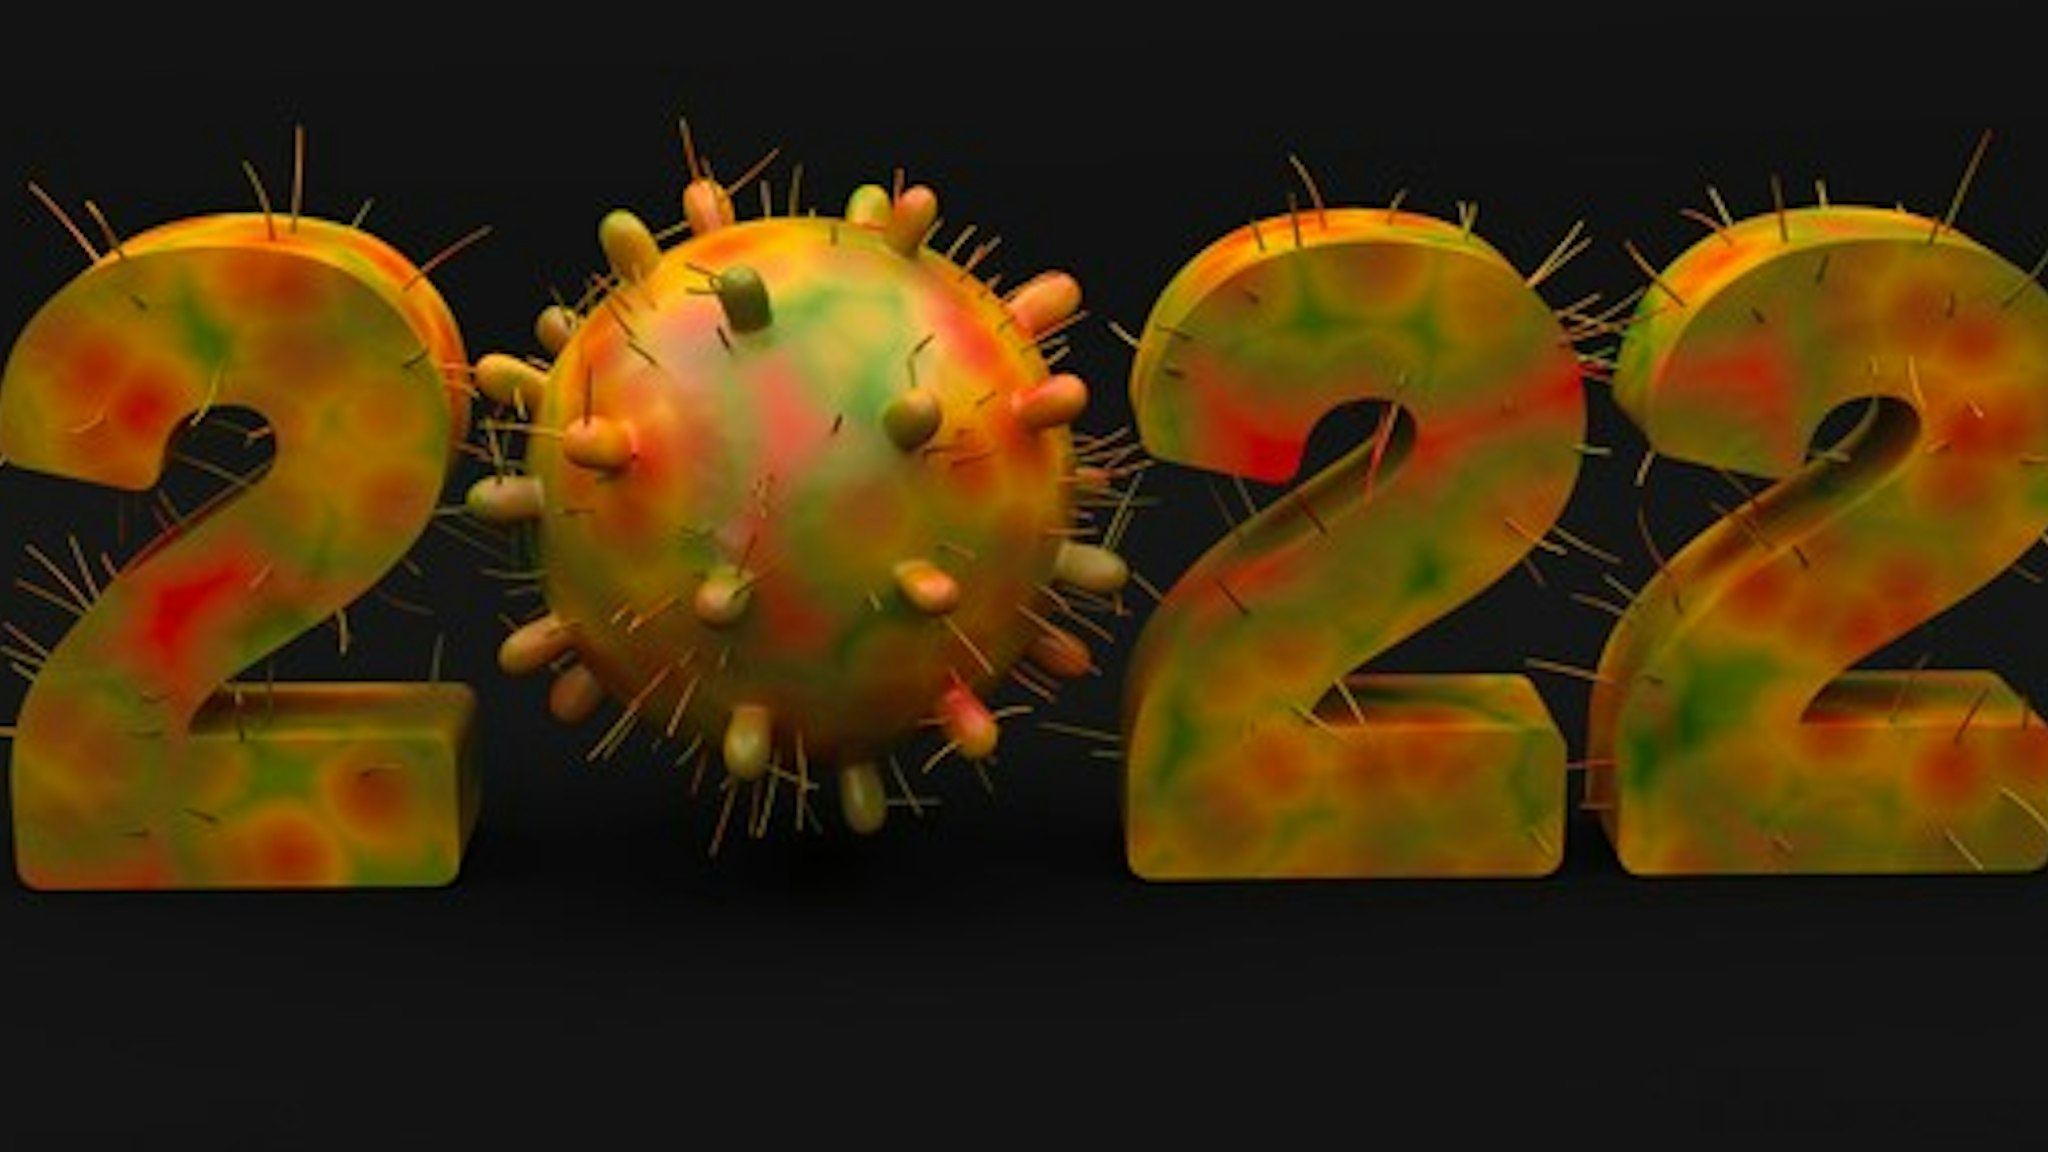 Here's a computer generated image of New year 2022 written with Coronavirus latest variant Omicron. The virus omicron is used instead of zero as Globally all nations are fighting against the latest mutant Omicron of covid-19.